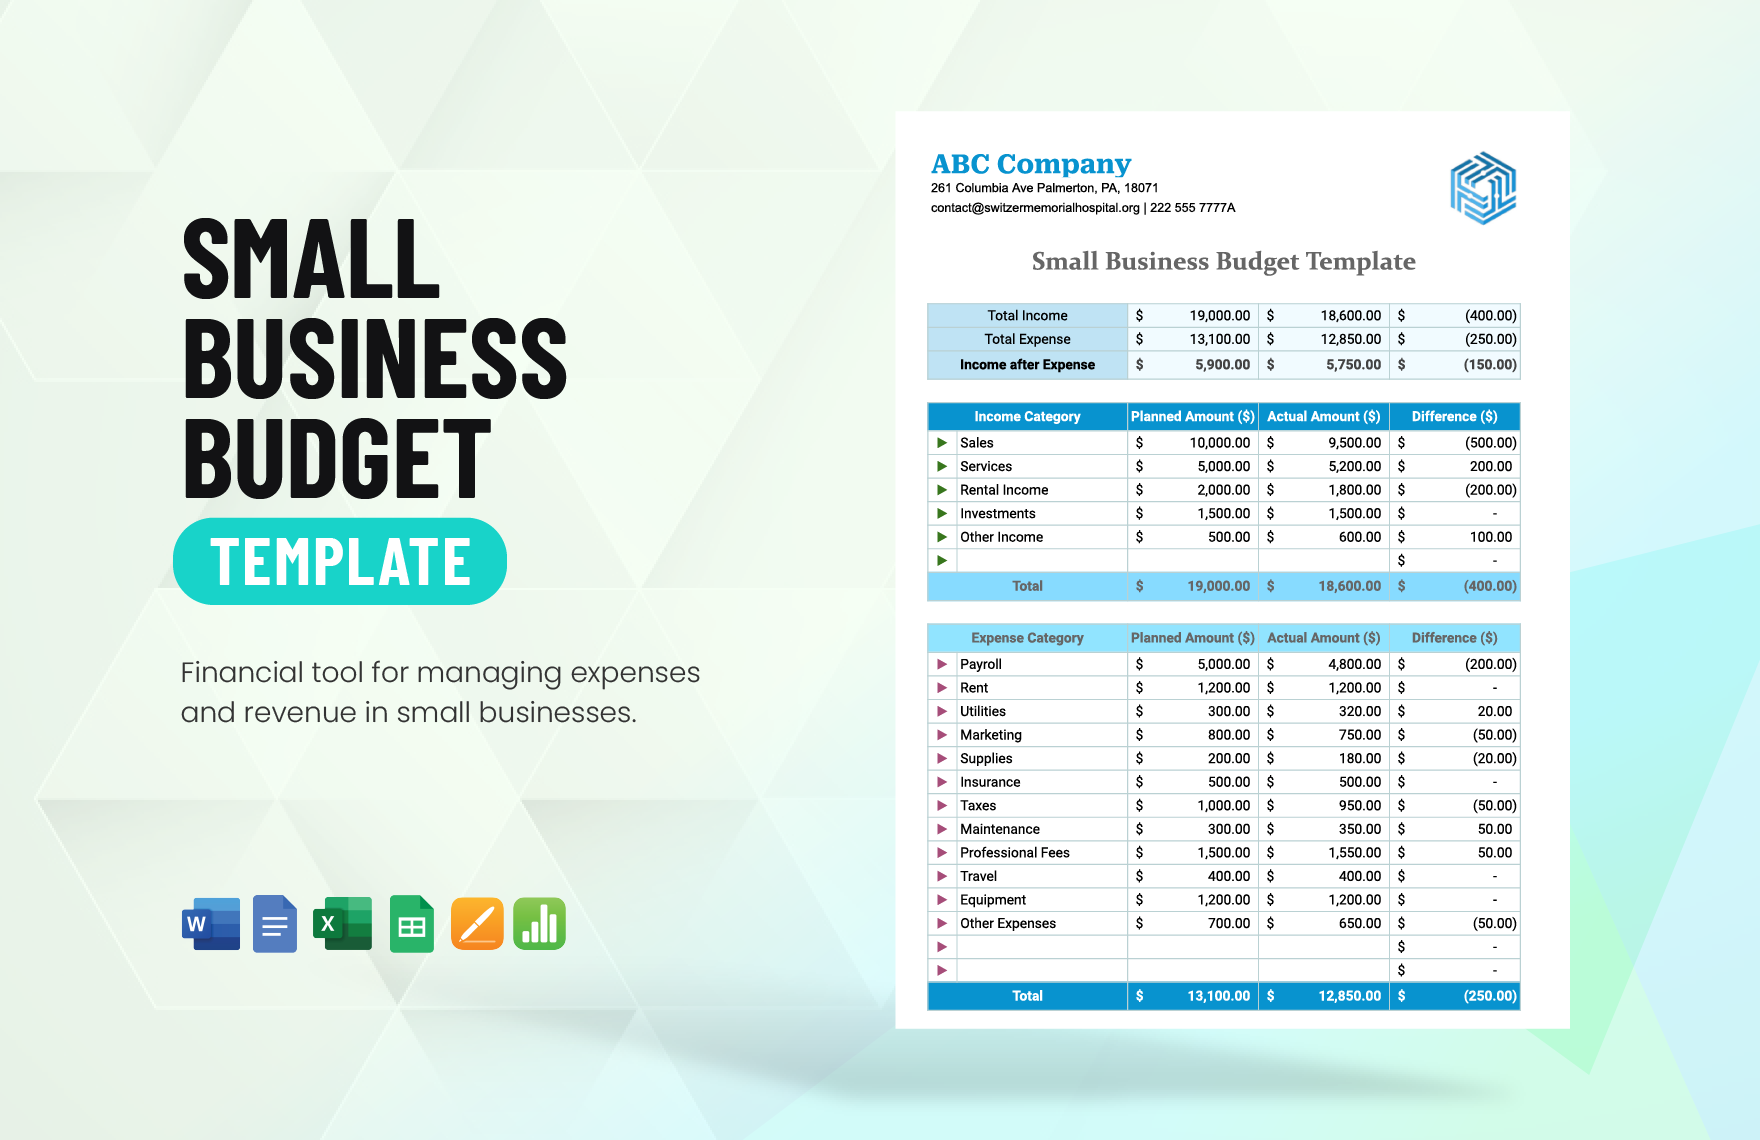 Free Small Business Budget Spreadsheet Template in Word, Google Docs, Excel, Google Sheets, Apple Pages, Apple Numbers